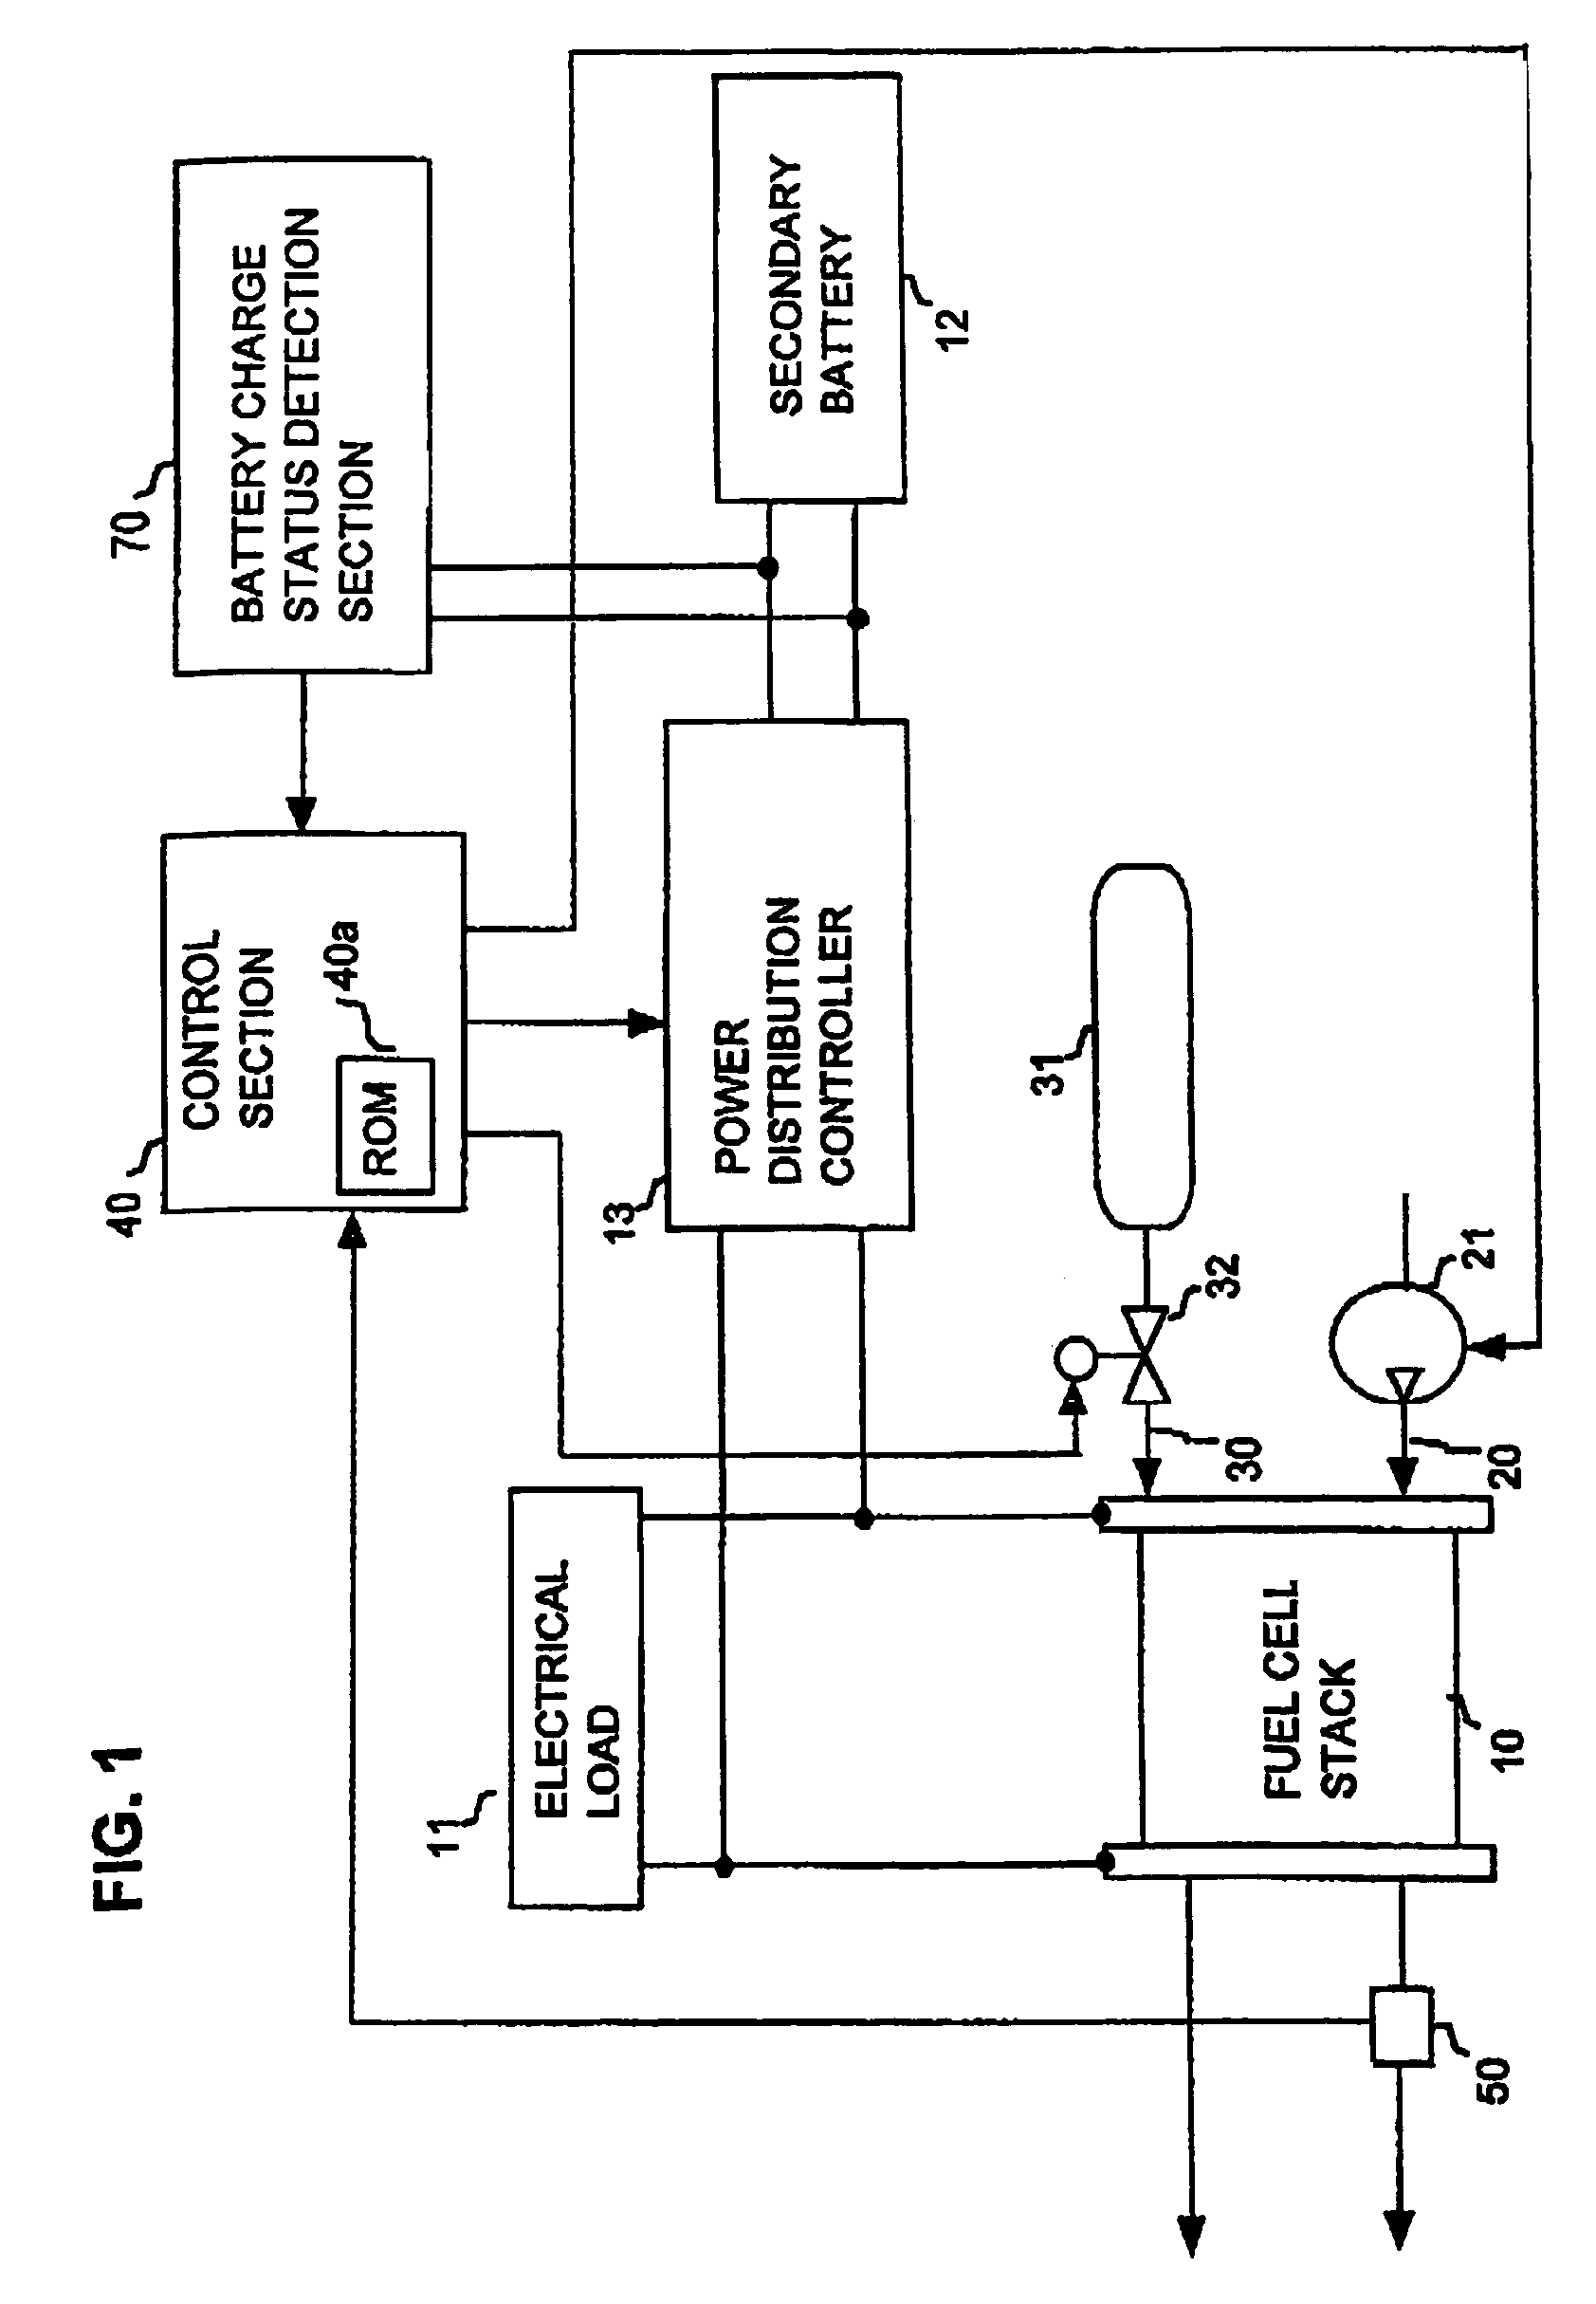 Fuel cell system utilizing control of operating current to adjust moisture content within fuel cell